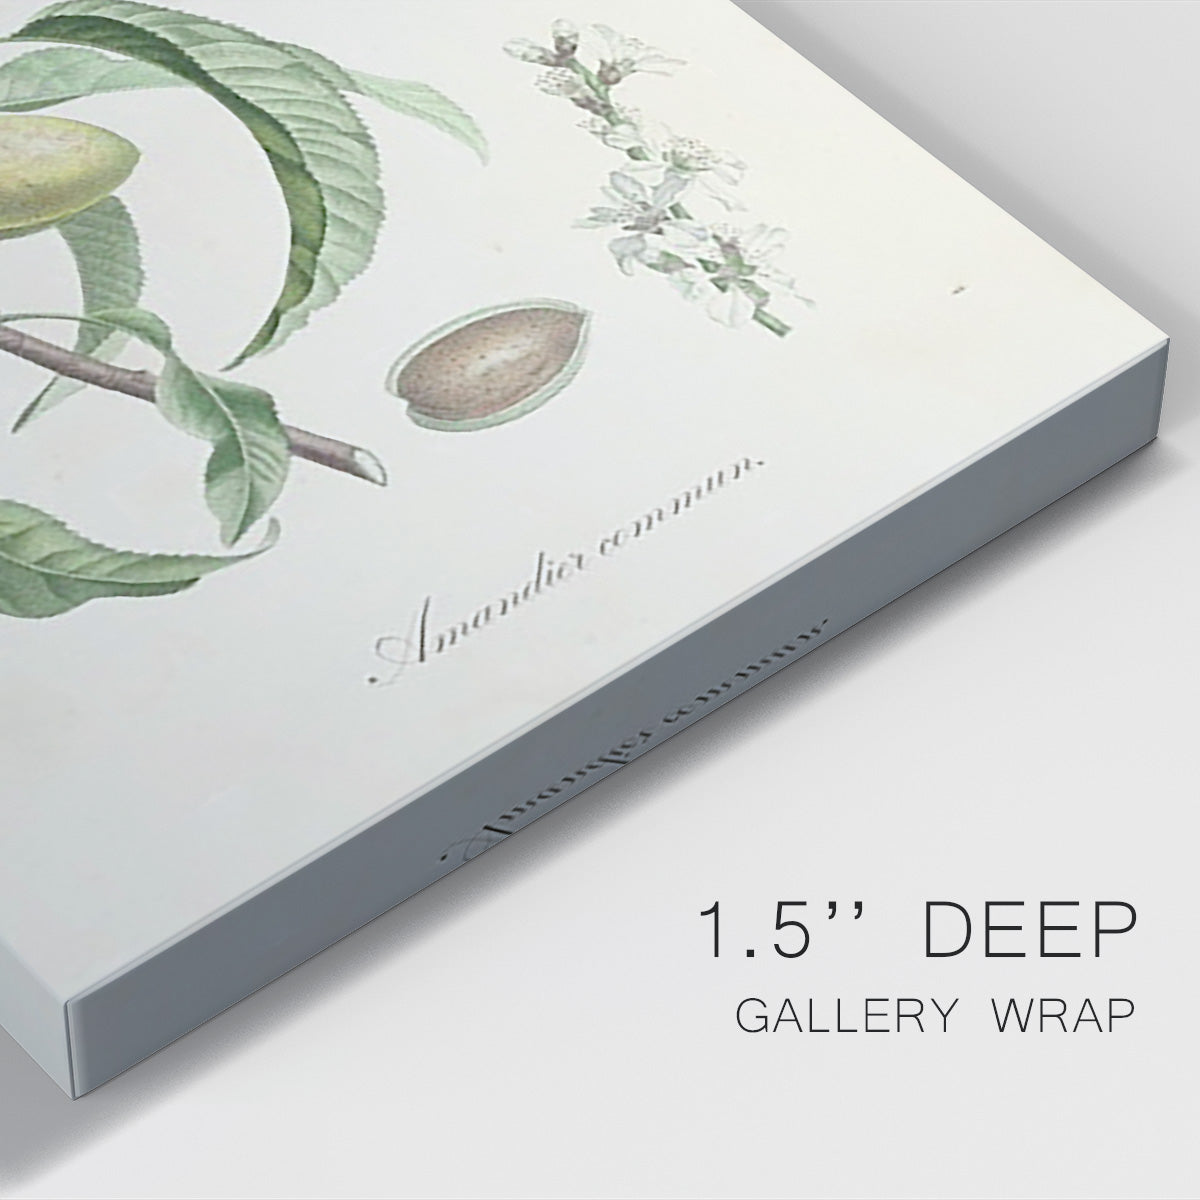 Antique Almond Botanical IV Premium Gallery Wrapped Canvas - Ready to Hang